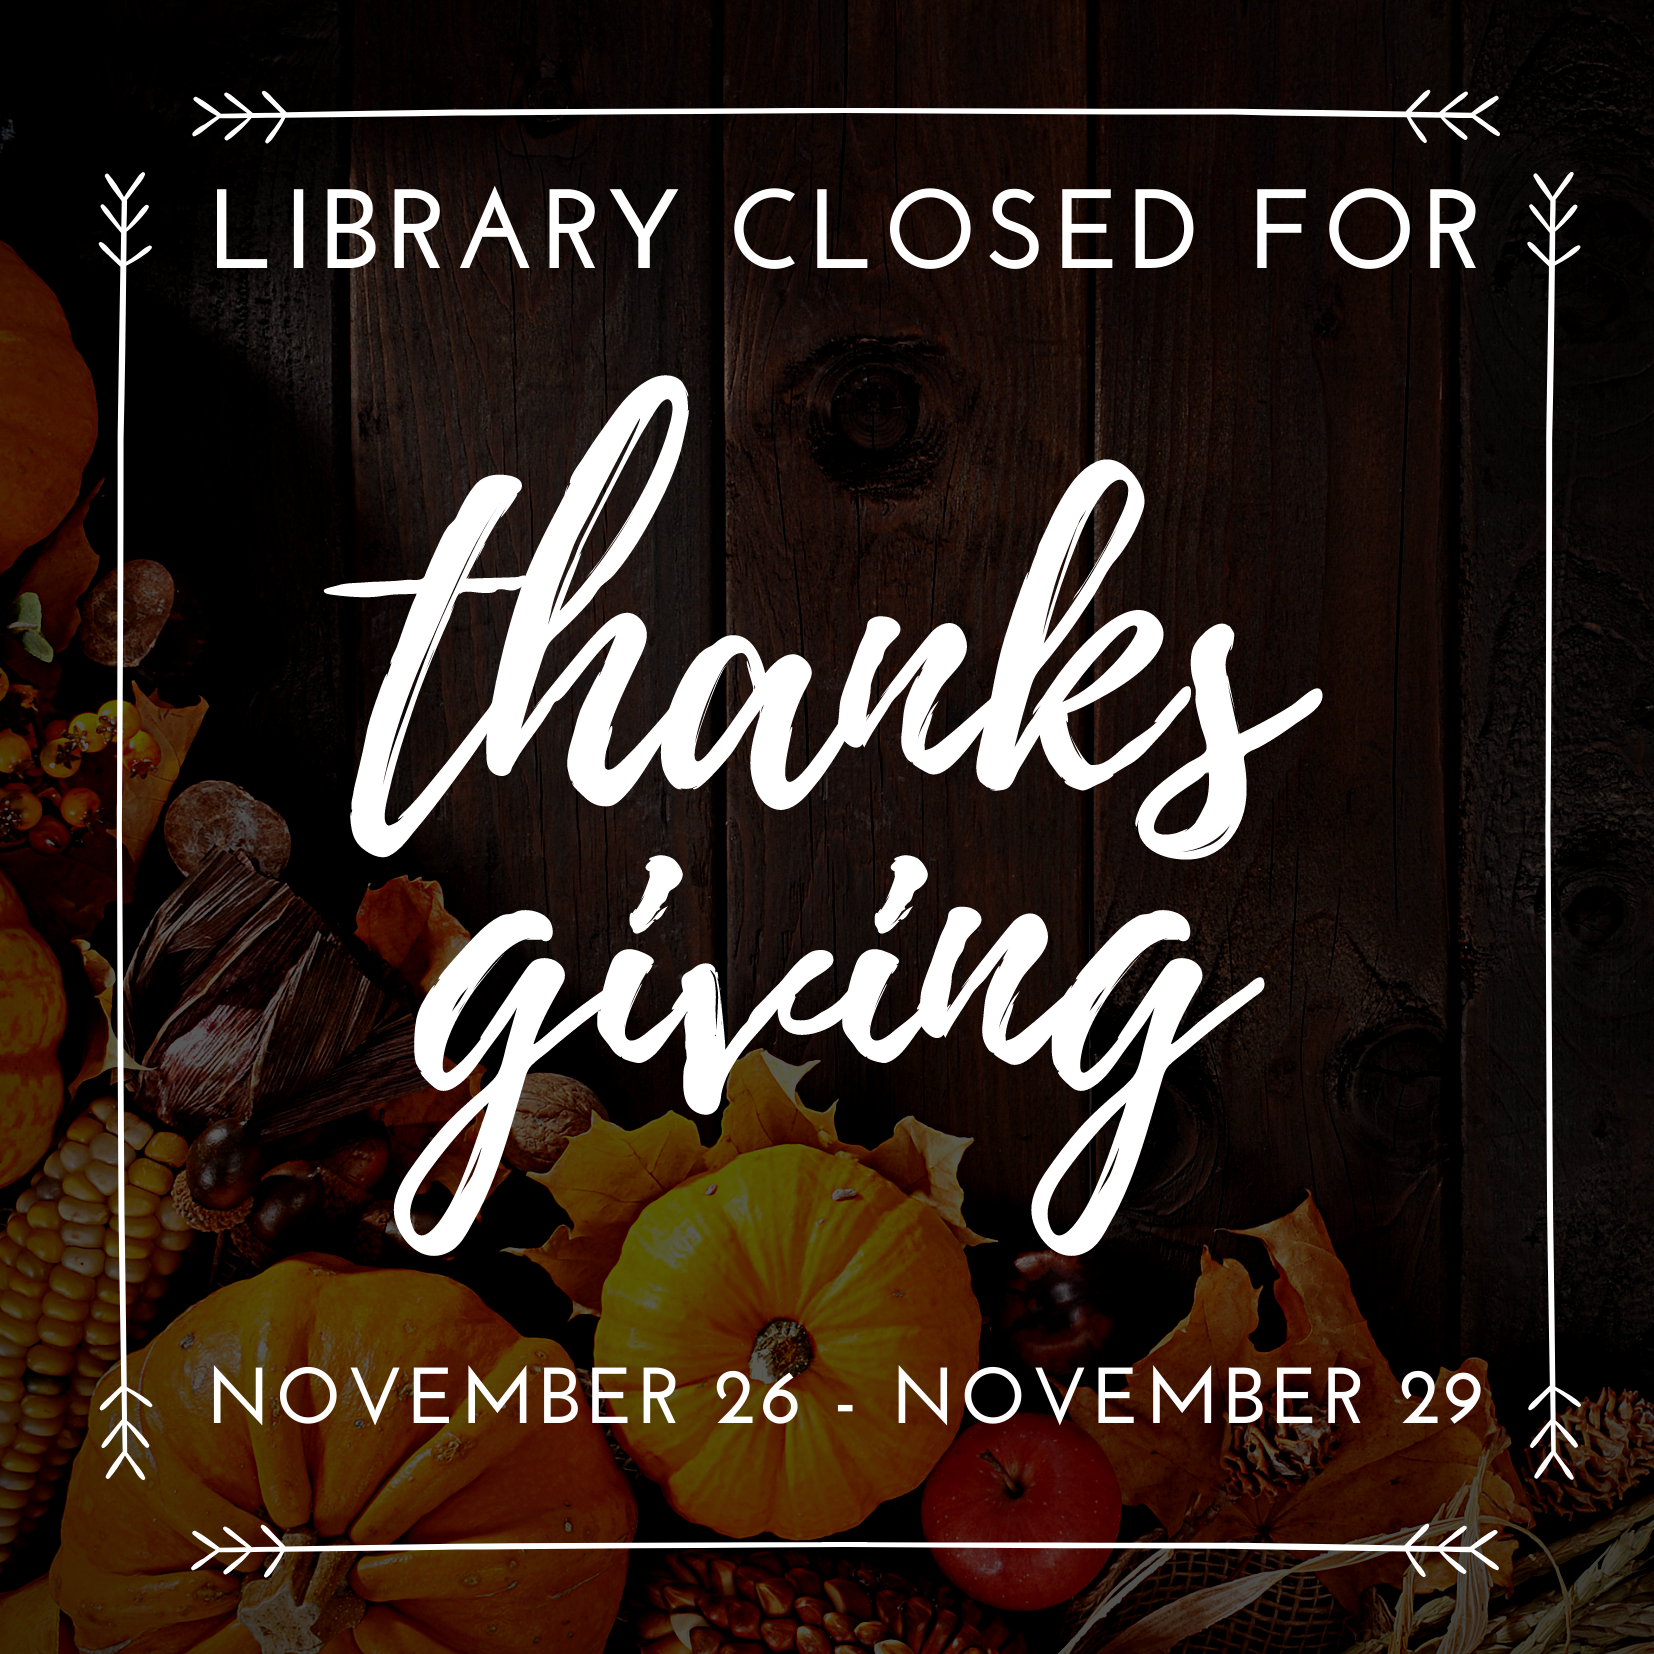 Closed in Observance of Thanksgiving, November 26 - 28!